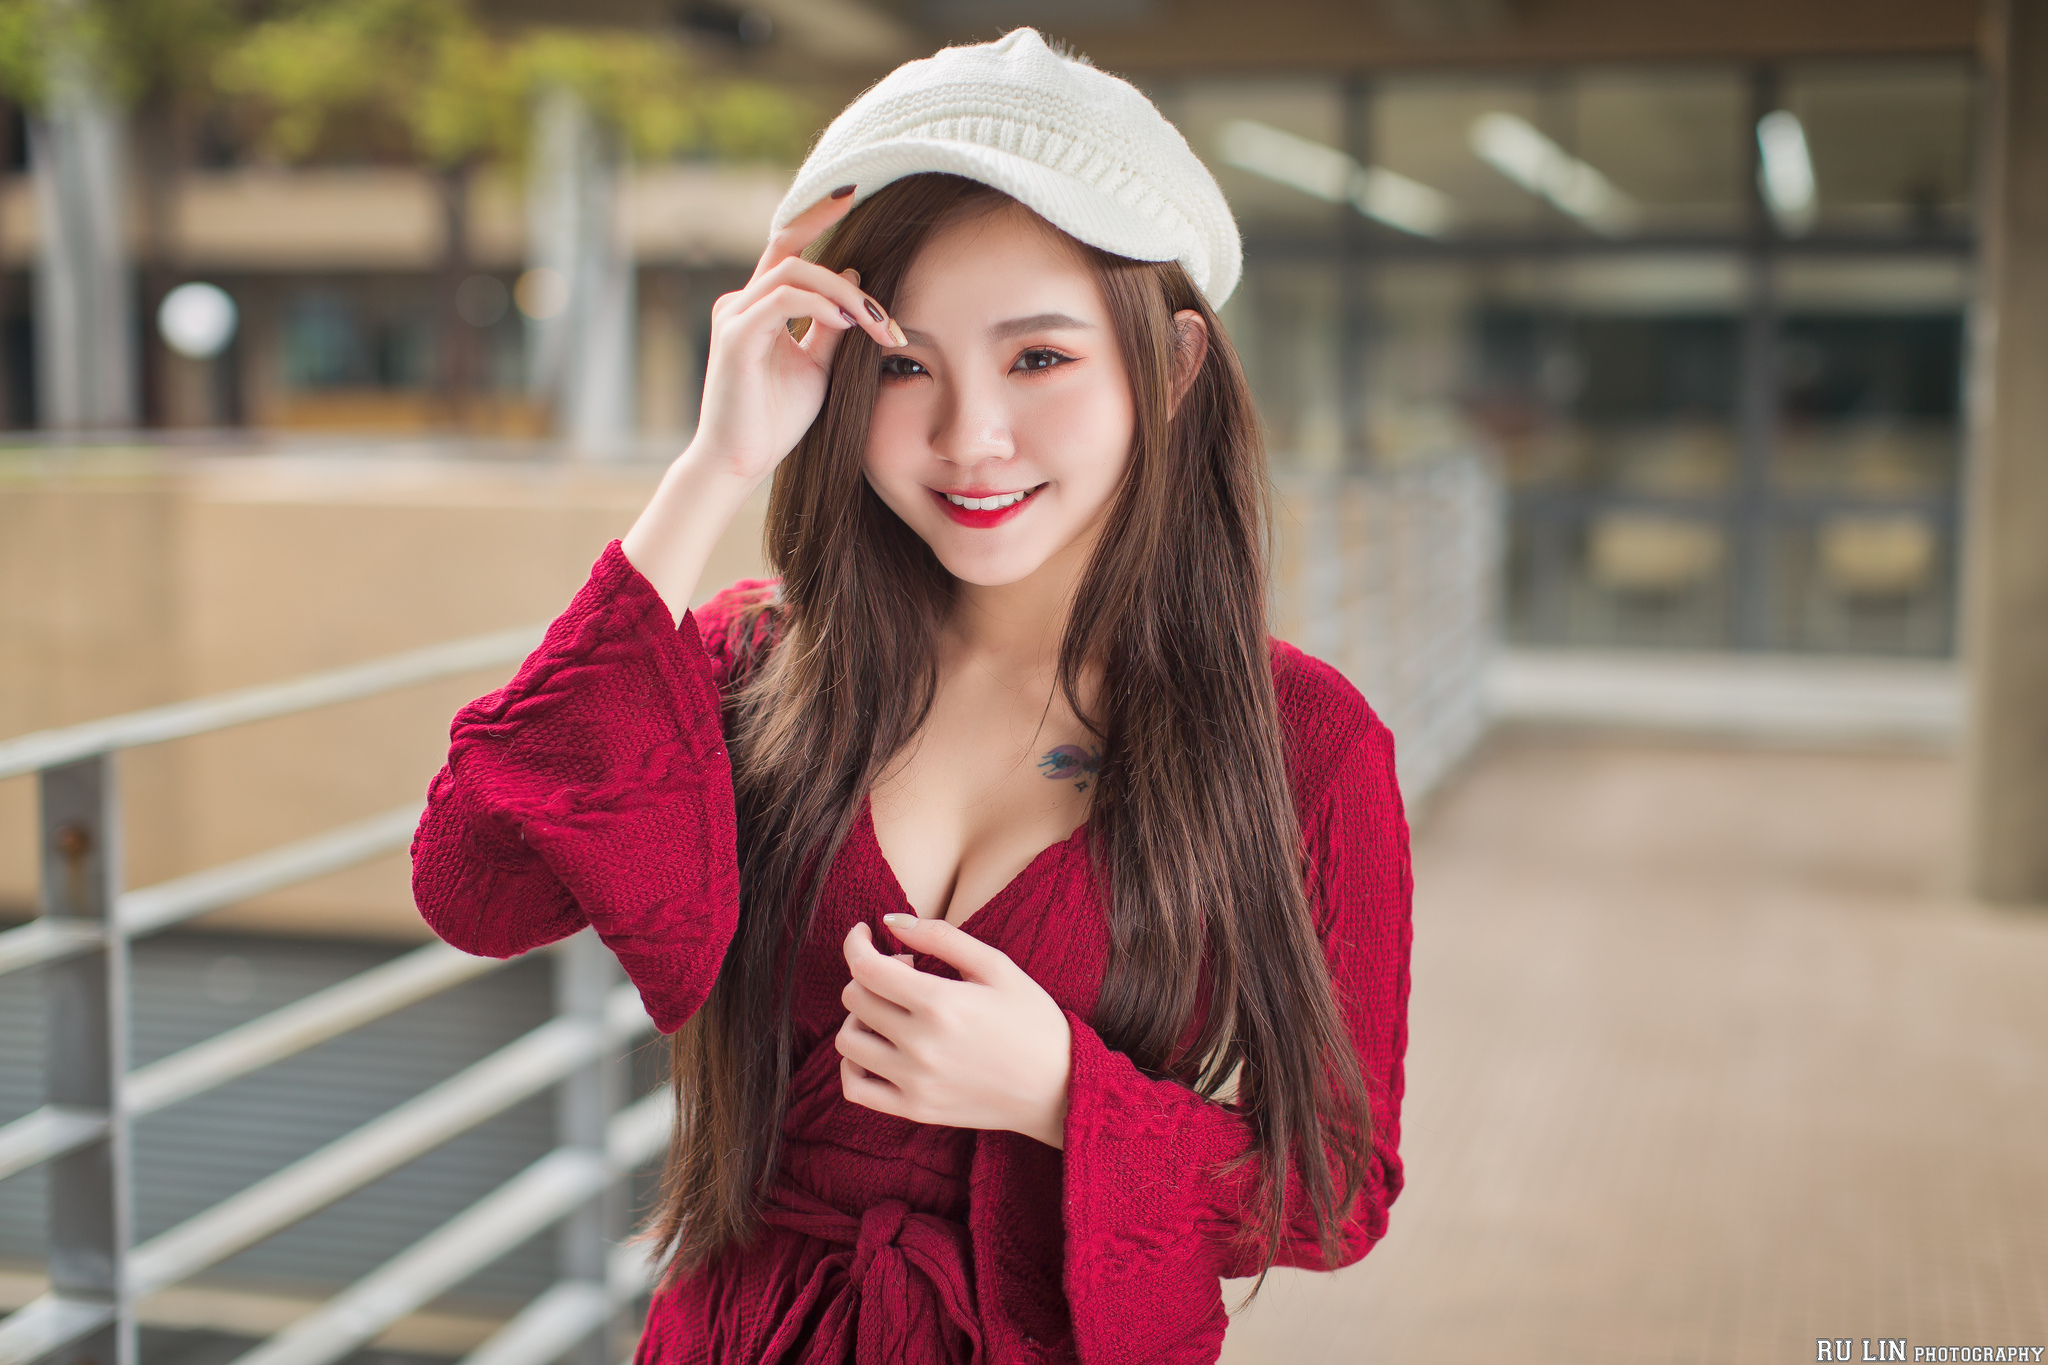 Women Model Asian Brunette Long Hair Looking At Viewer Red Lipstick Smiling Painted Nails Knit Hat K 2048x1365